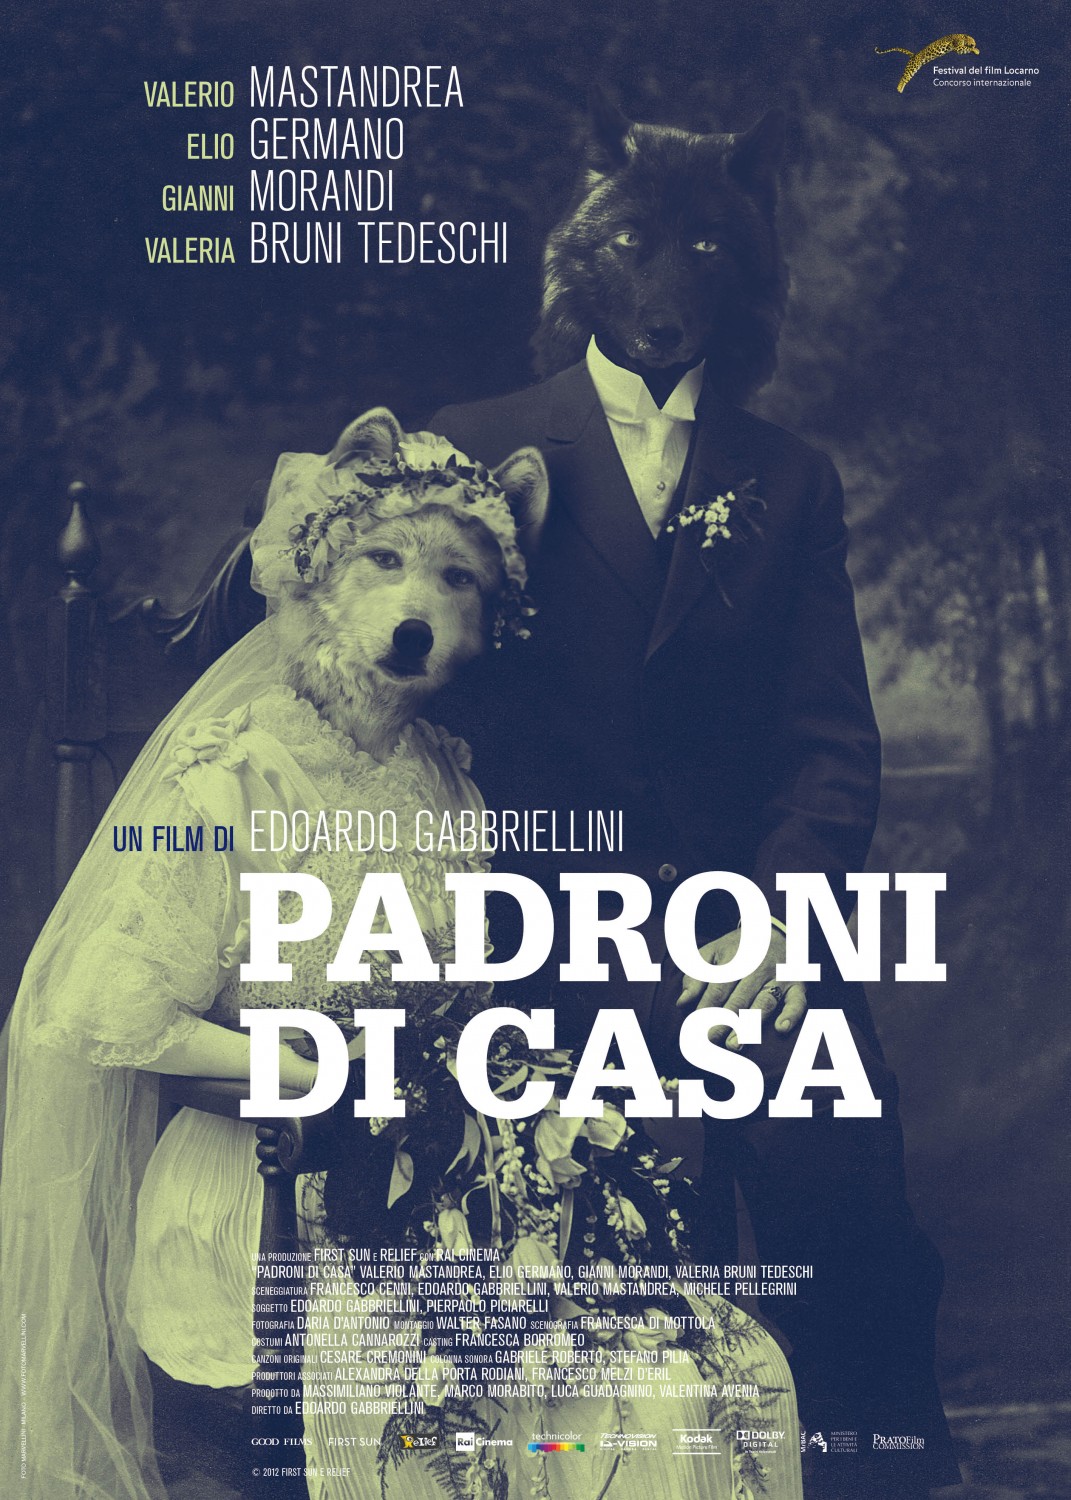 Extra Large Movie Poster Image for I padroni di casa 